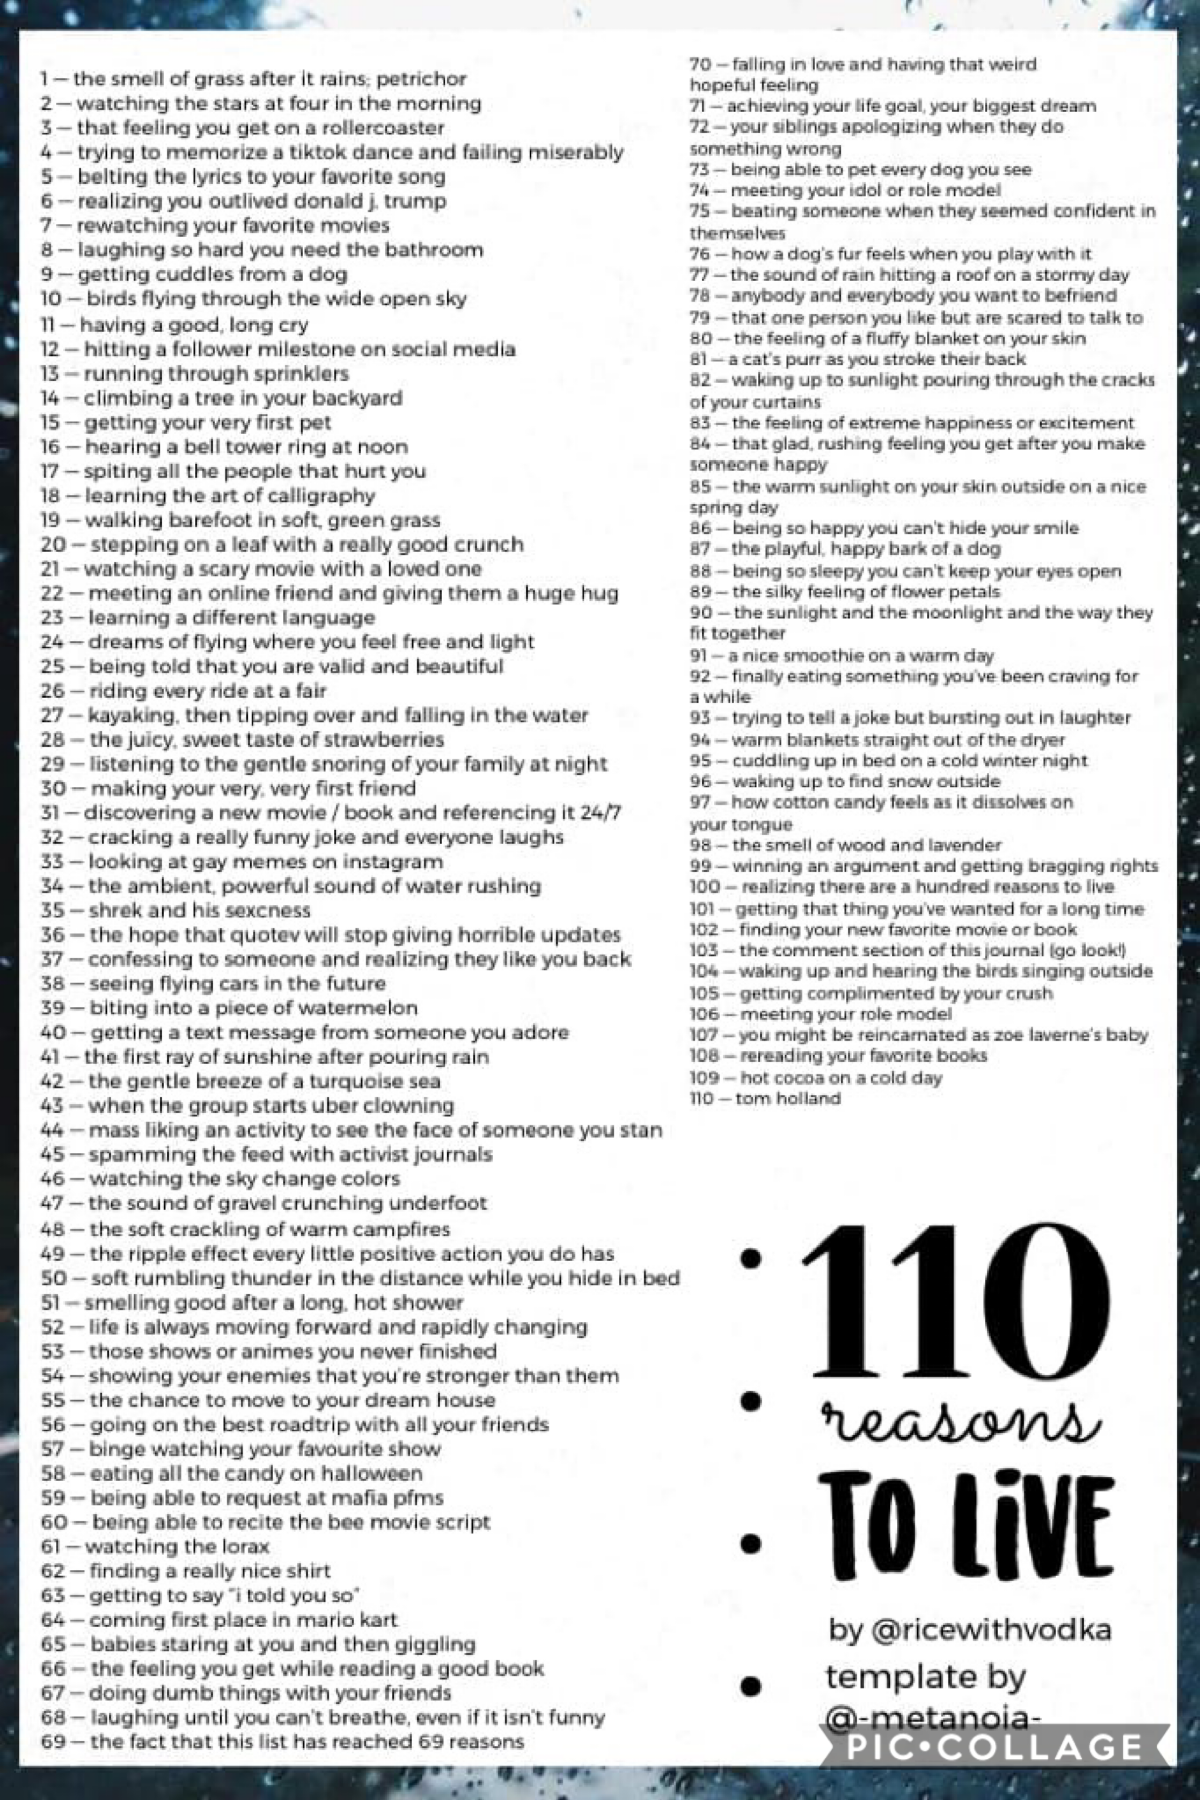 -110 reasons to live-

credit to @ricewithvodka on quotev

there is always a reason to live. always.